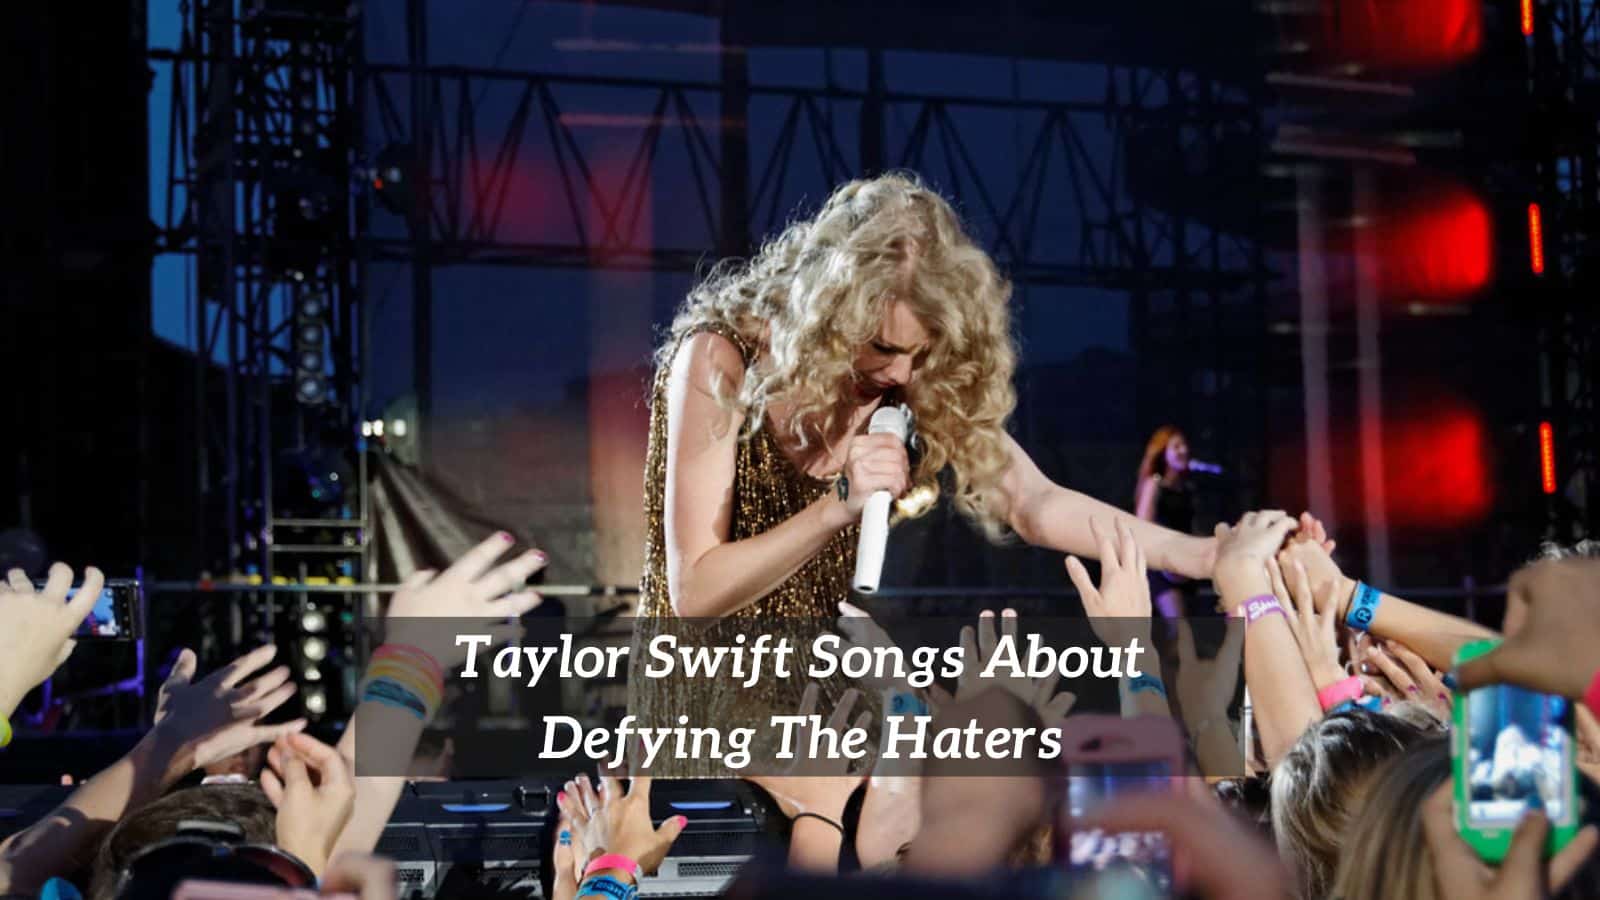 Taylor Swift Songs About Defying The Haters